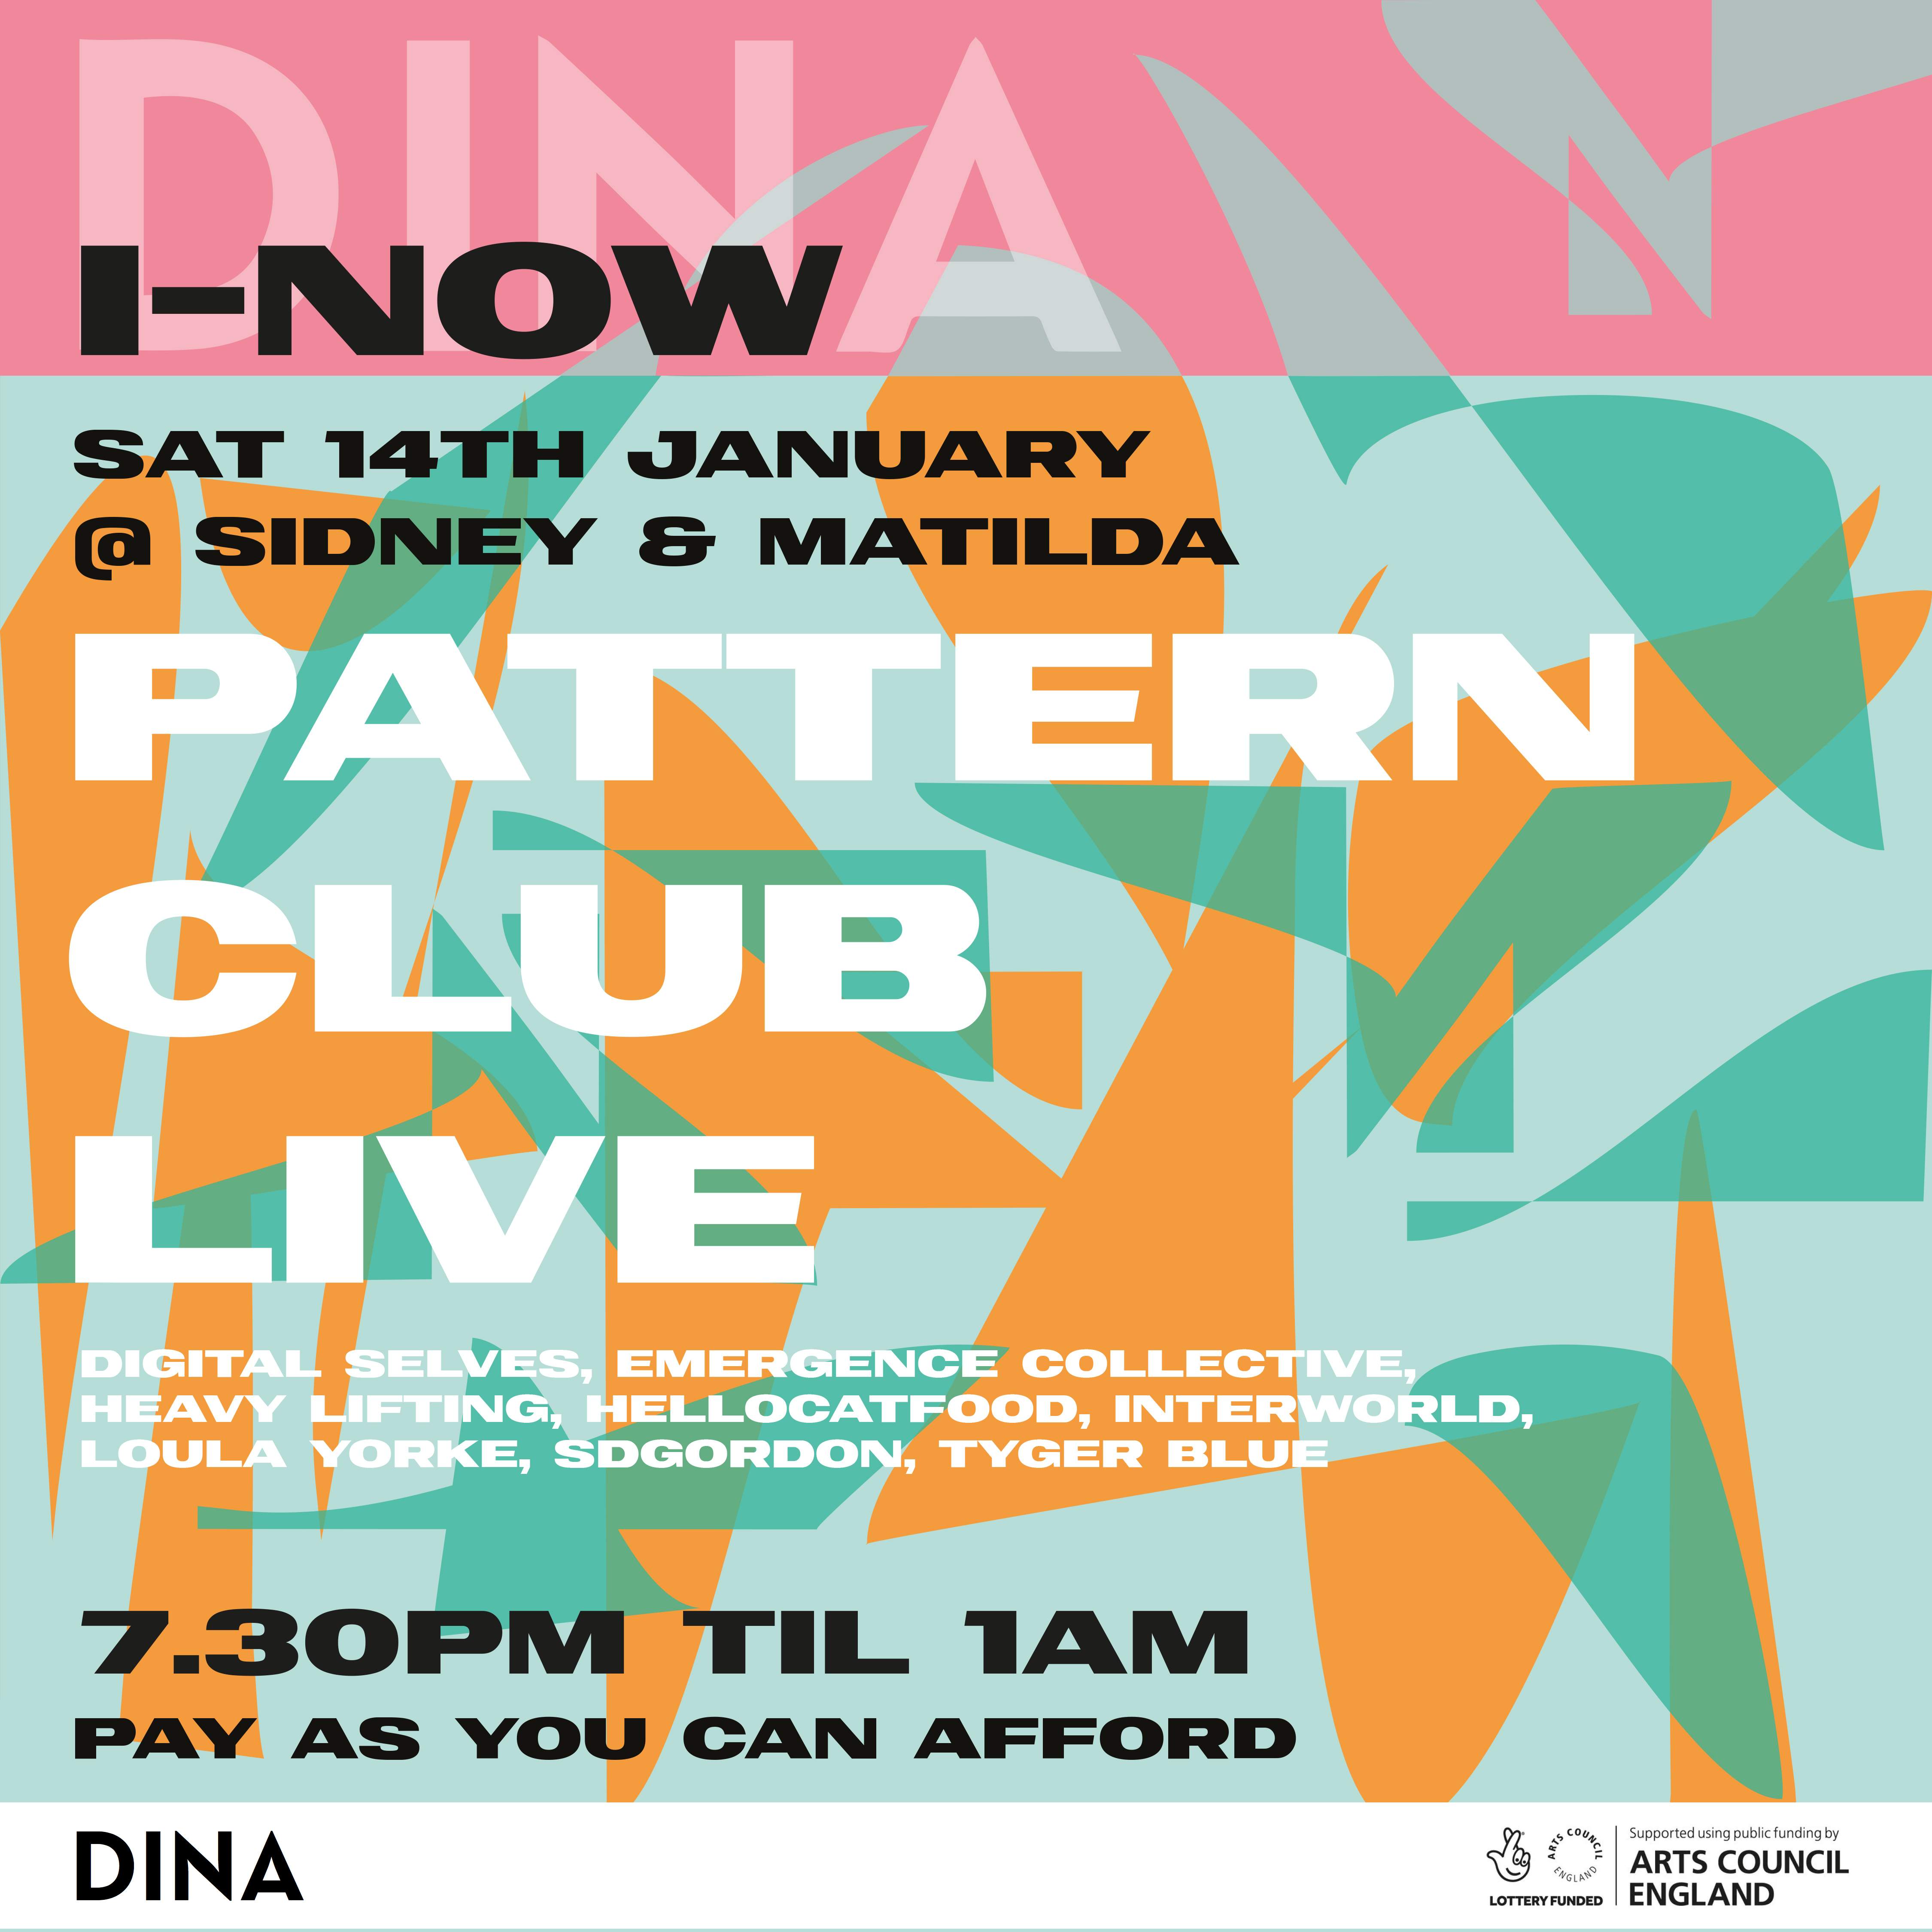 DINA pres i-Now - Pattern Club Live - フライヤー表